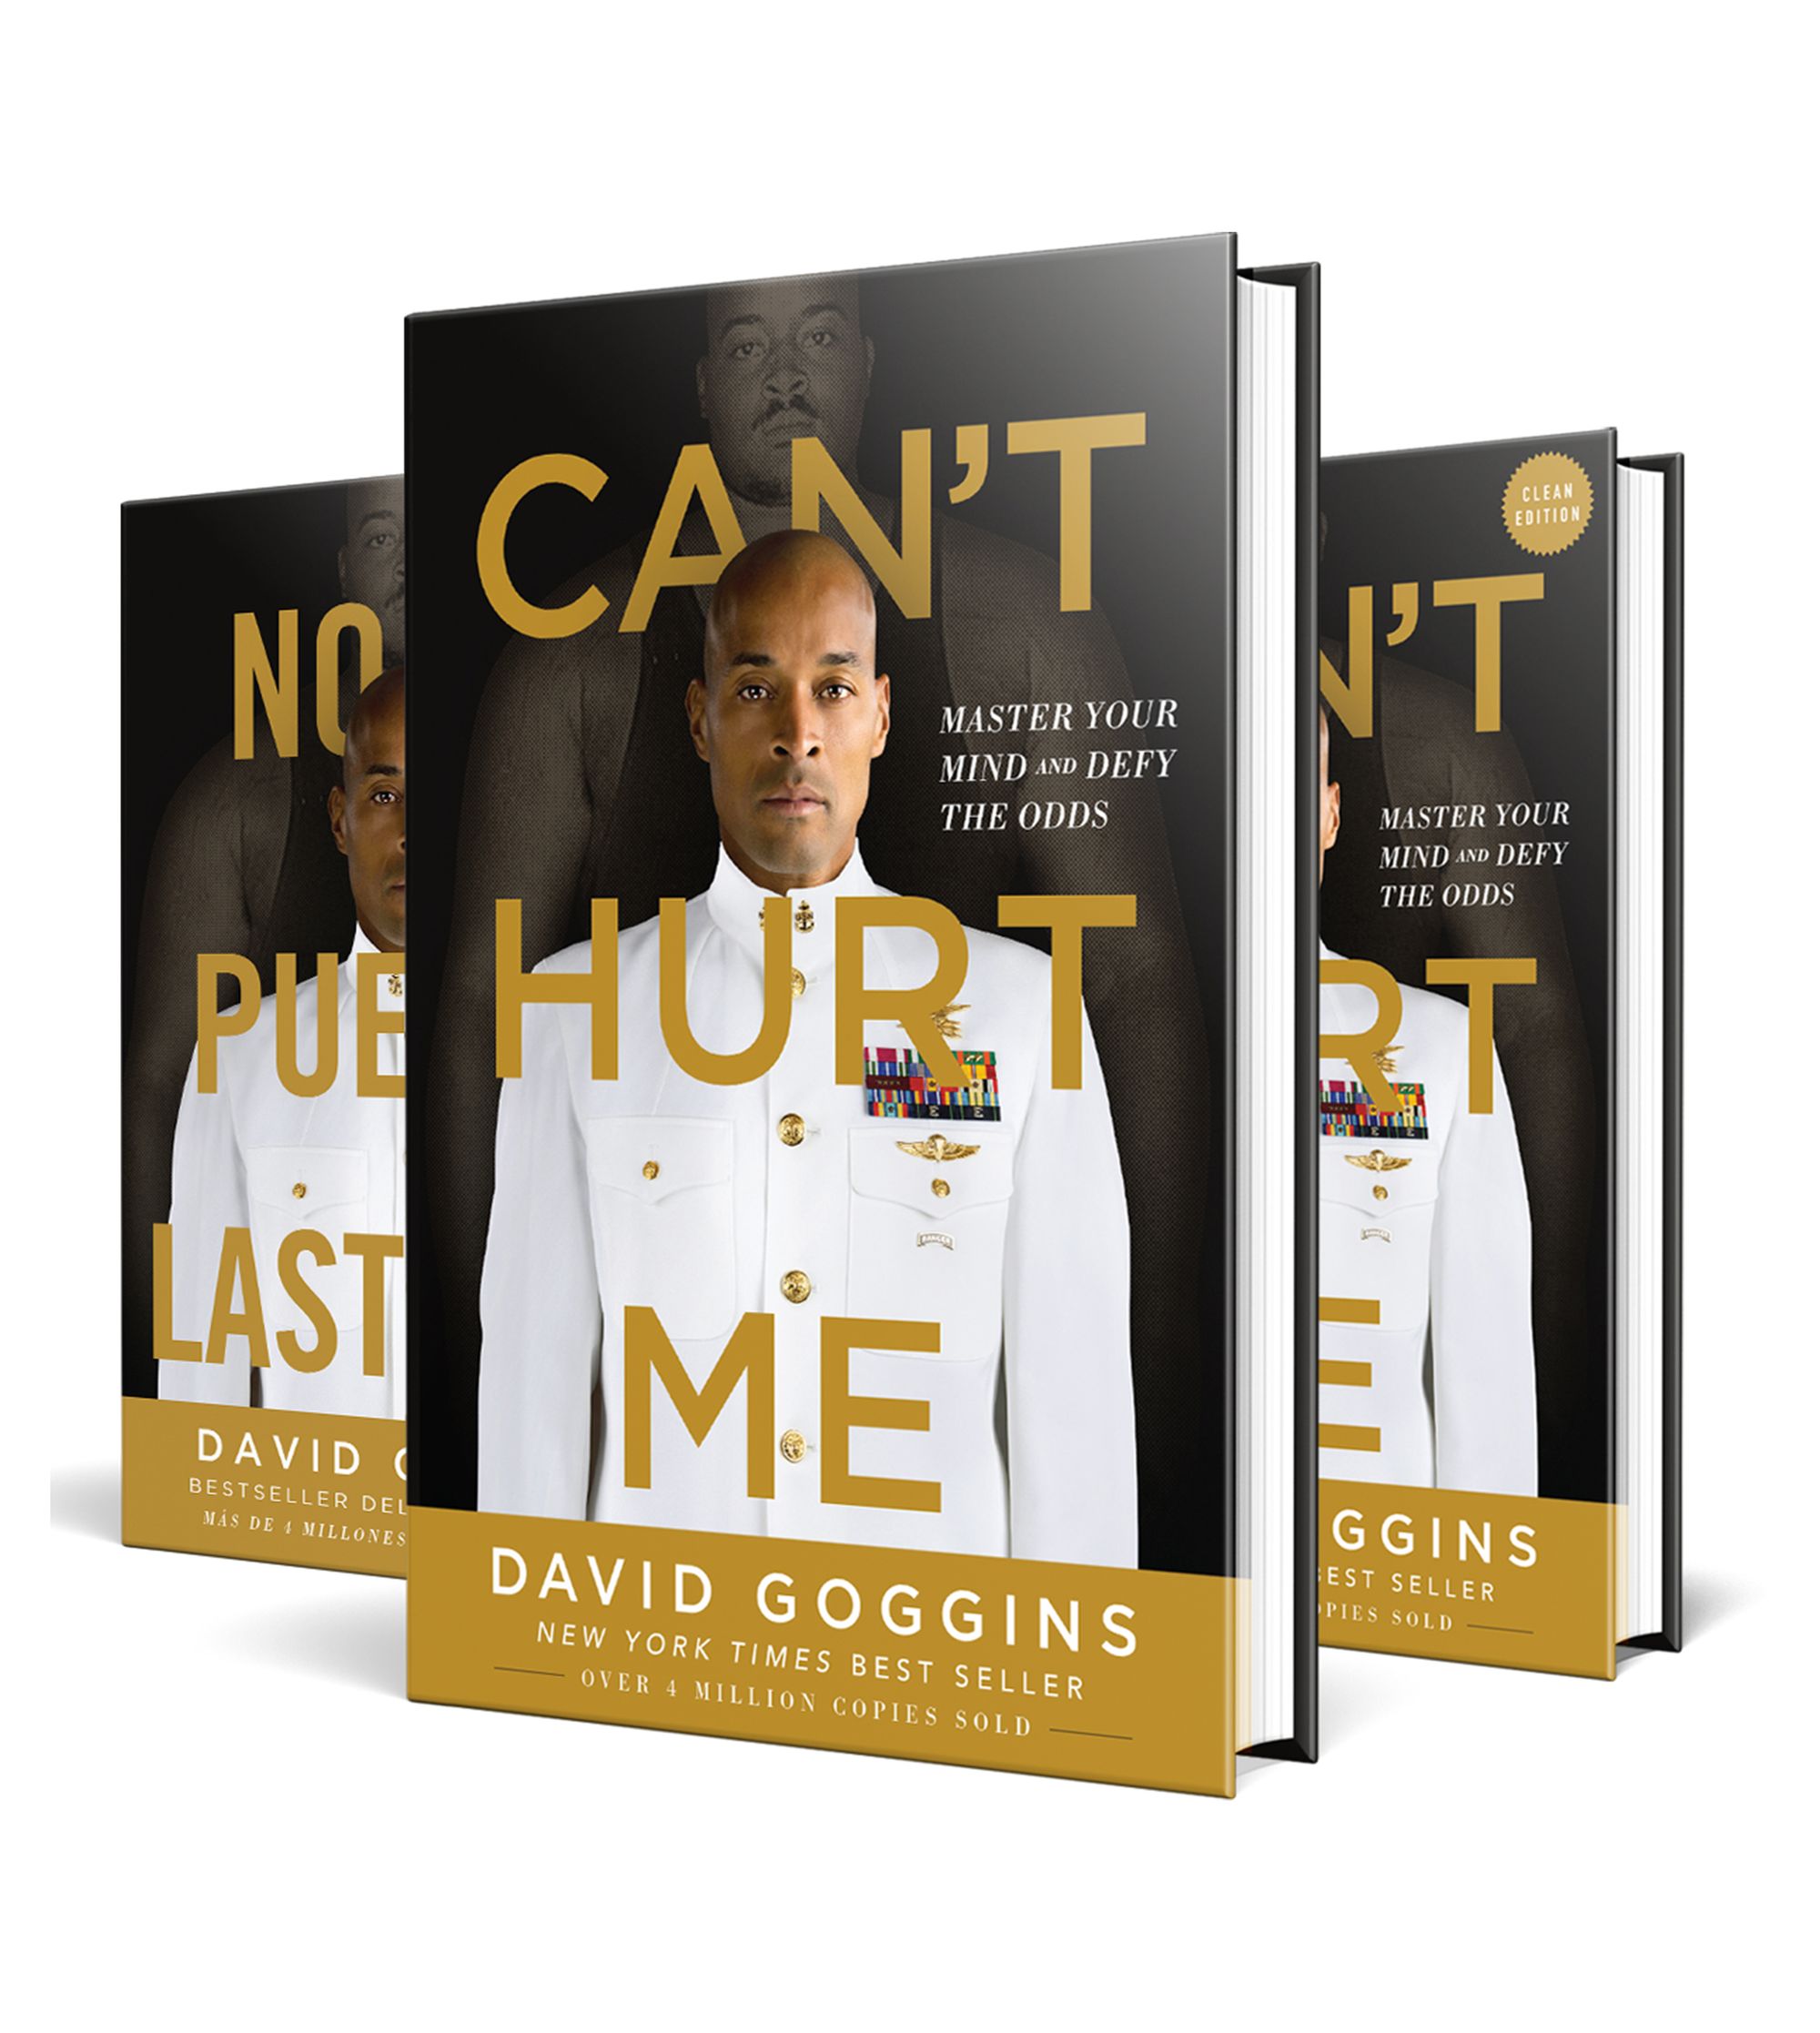 David Goggins — Can't Hurt Me. So the latest book that I read was